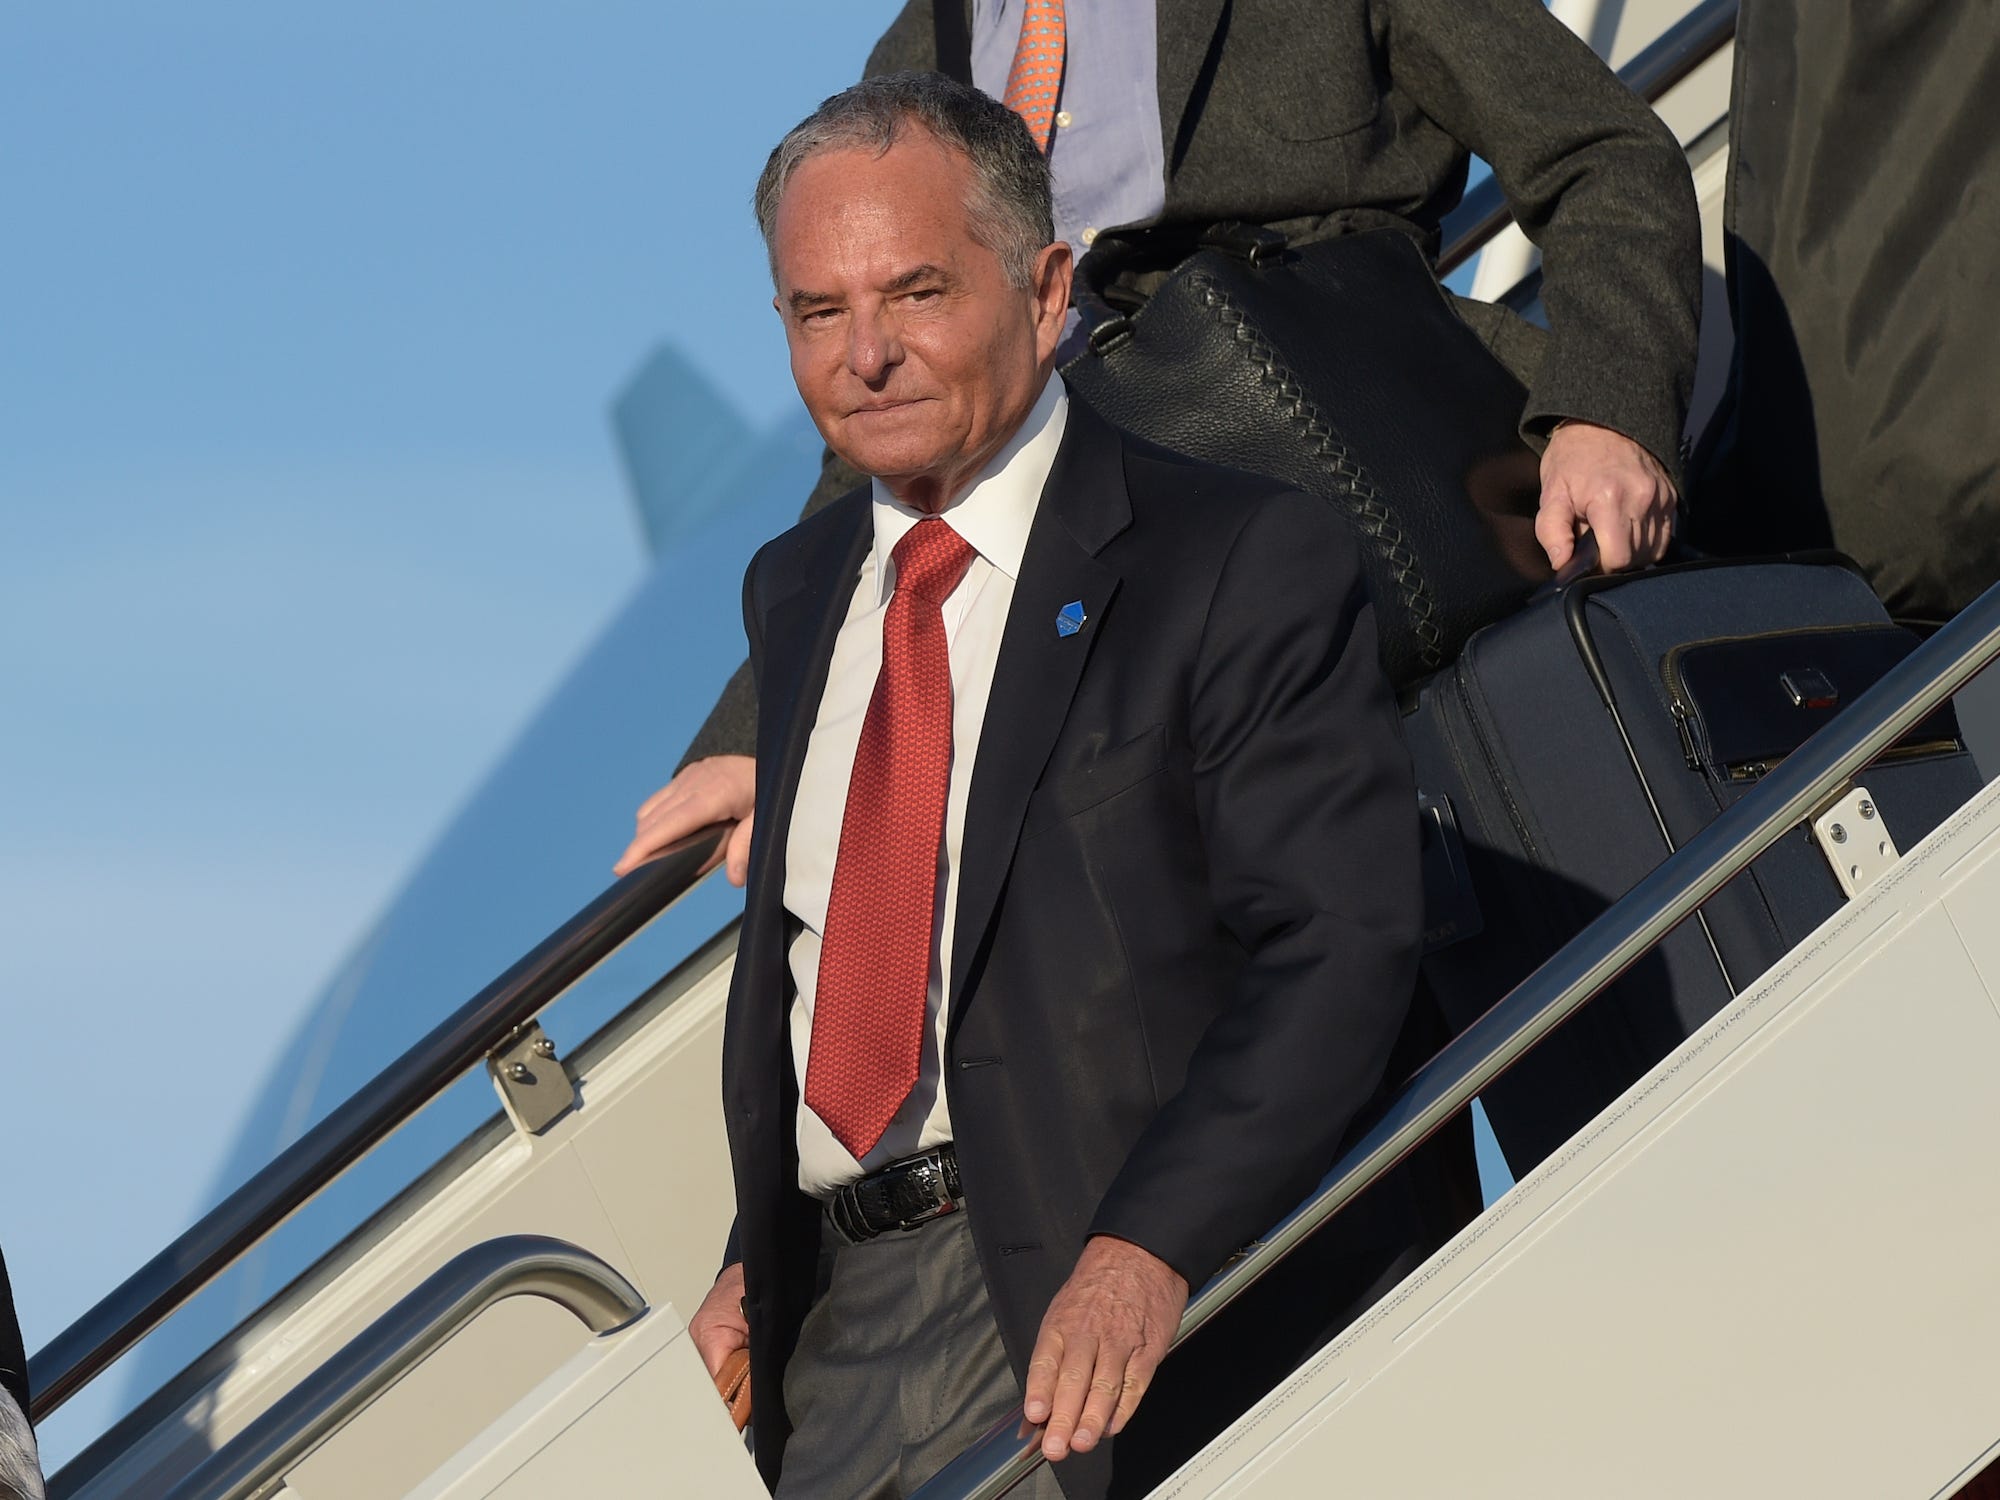 Perlmutter walking down the steps of Air Force One in 2017.